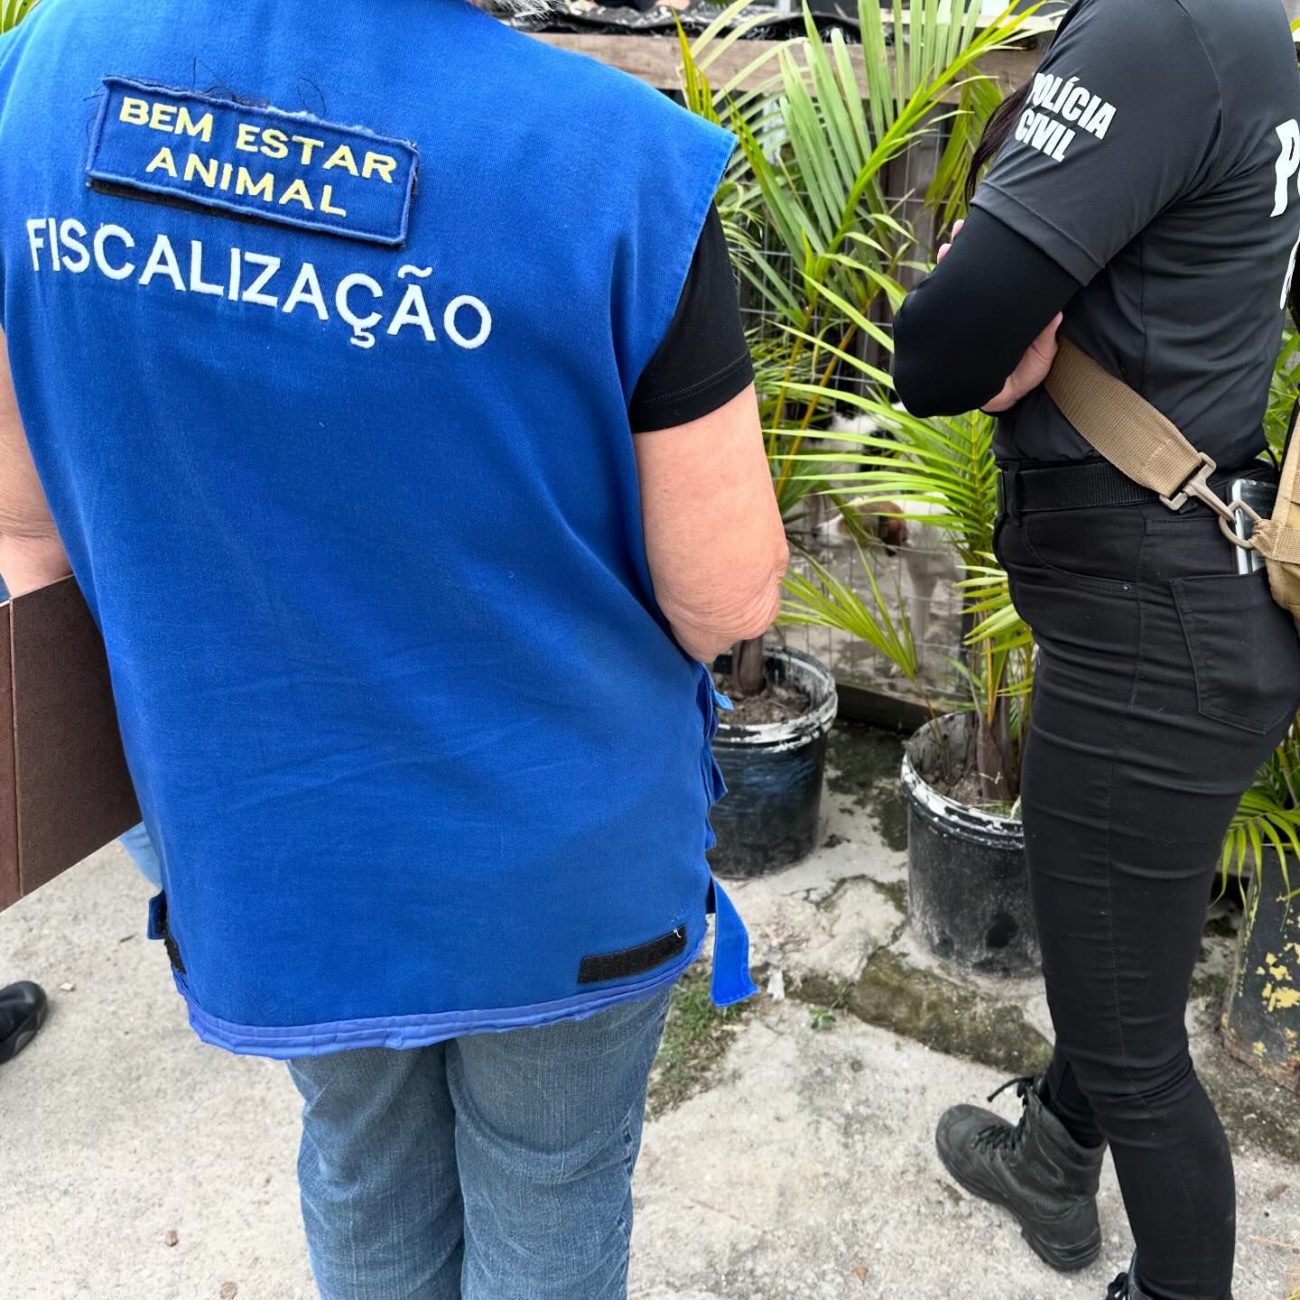 Actions of Dibea Palos and the DPA (Division of Animal Protection of the Civil Police) collected the animals this Friday (27) - Bem Estar Animal de Palhoça/Disclosure/ND